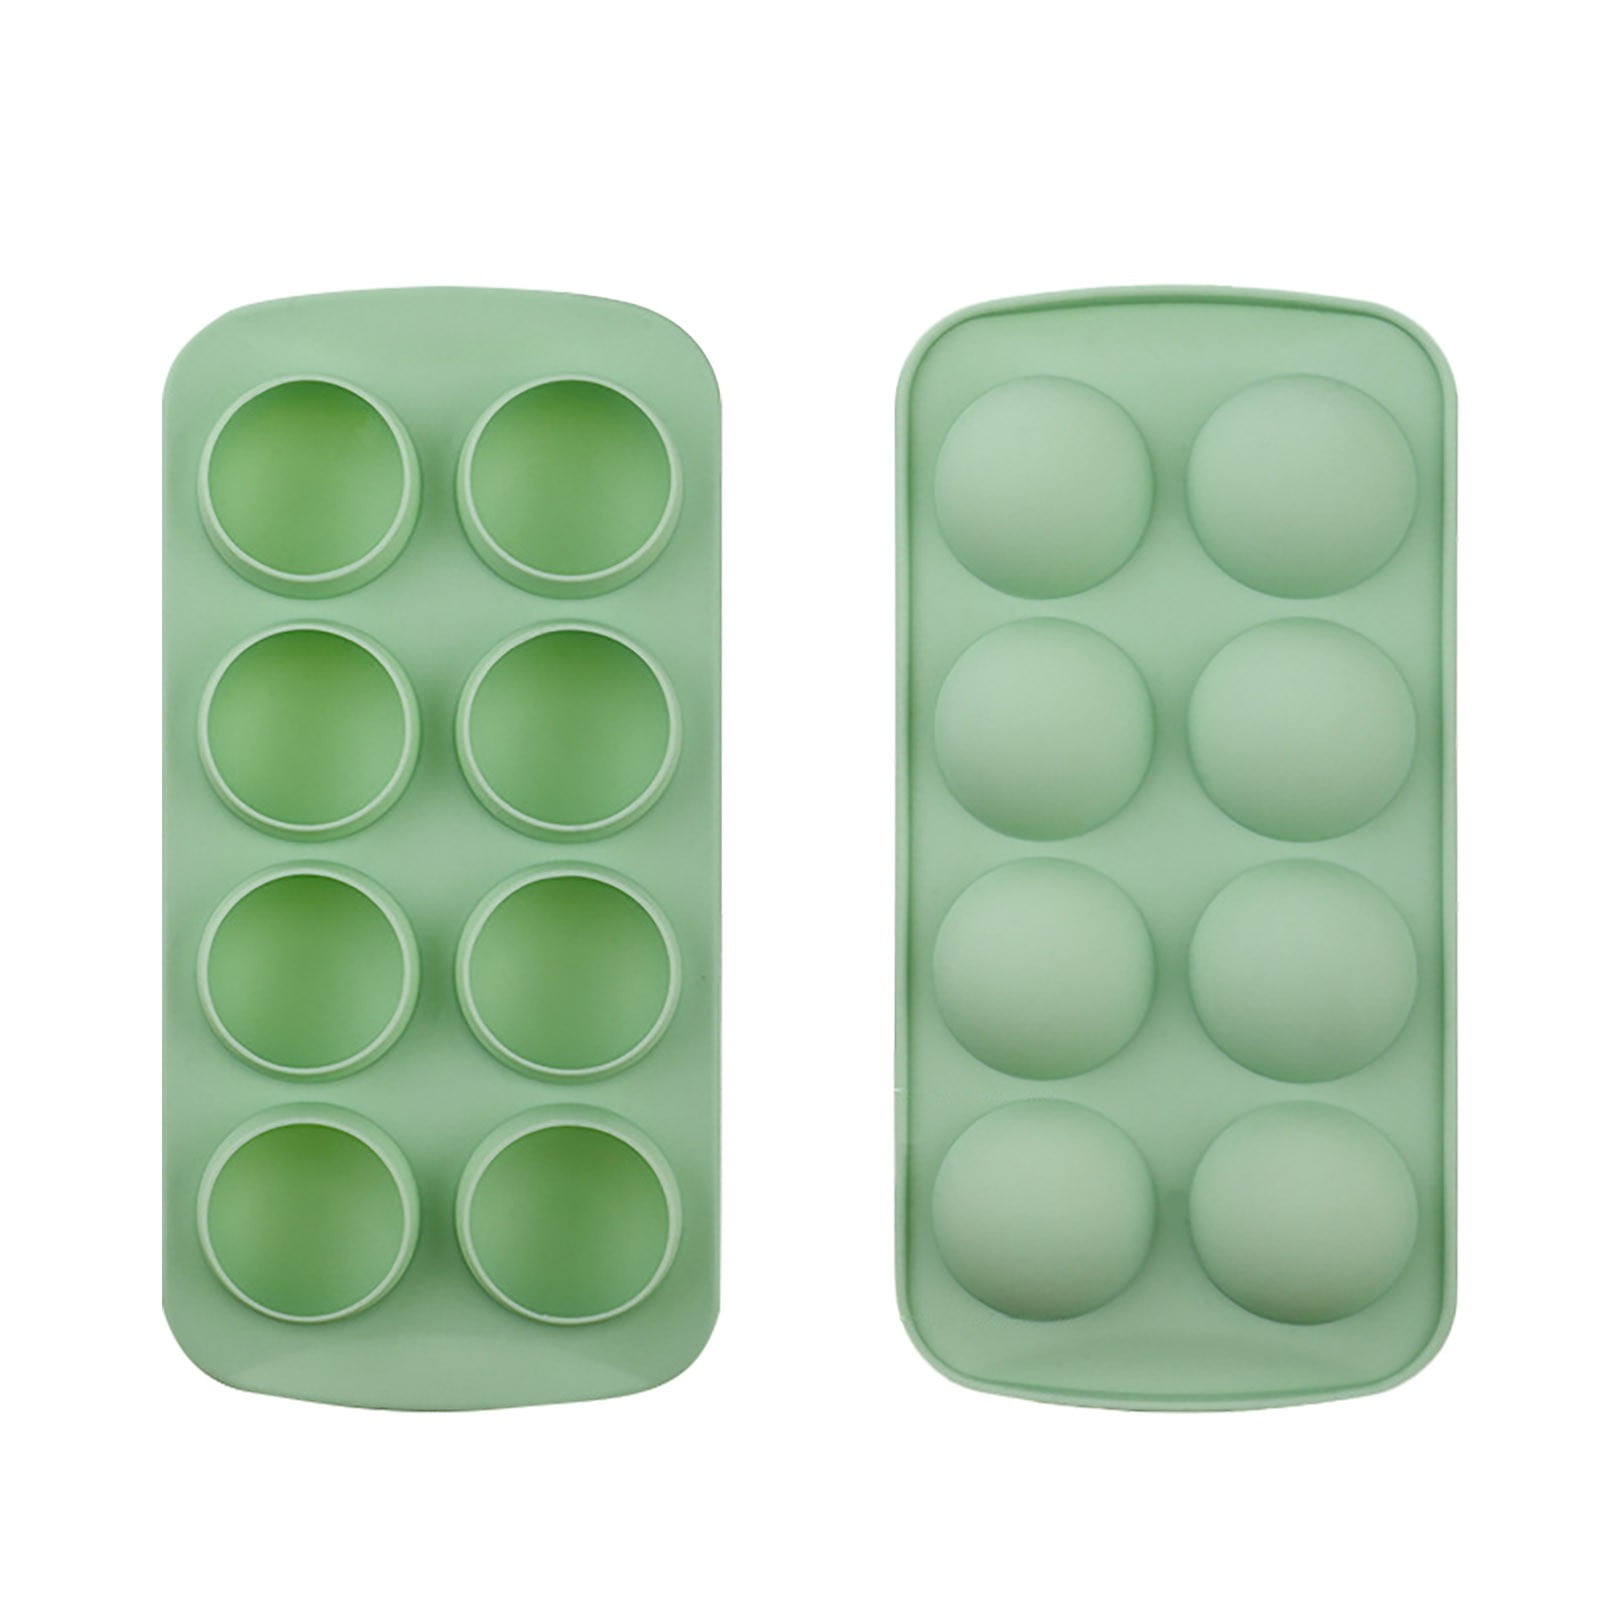 4 ice cup ice cube shooting shape rubber shooter freeze mold tray four hole  silicone mold